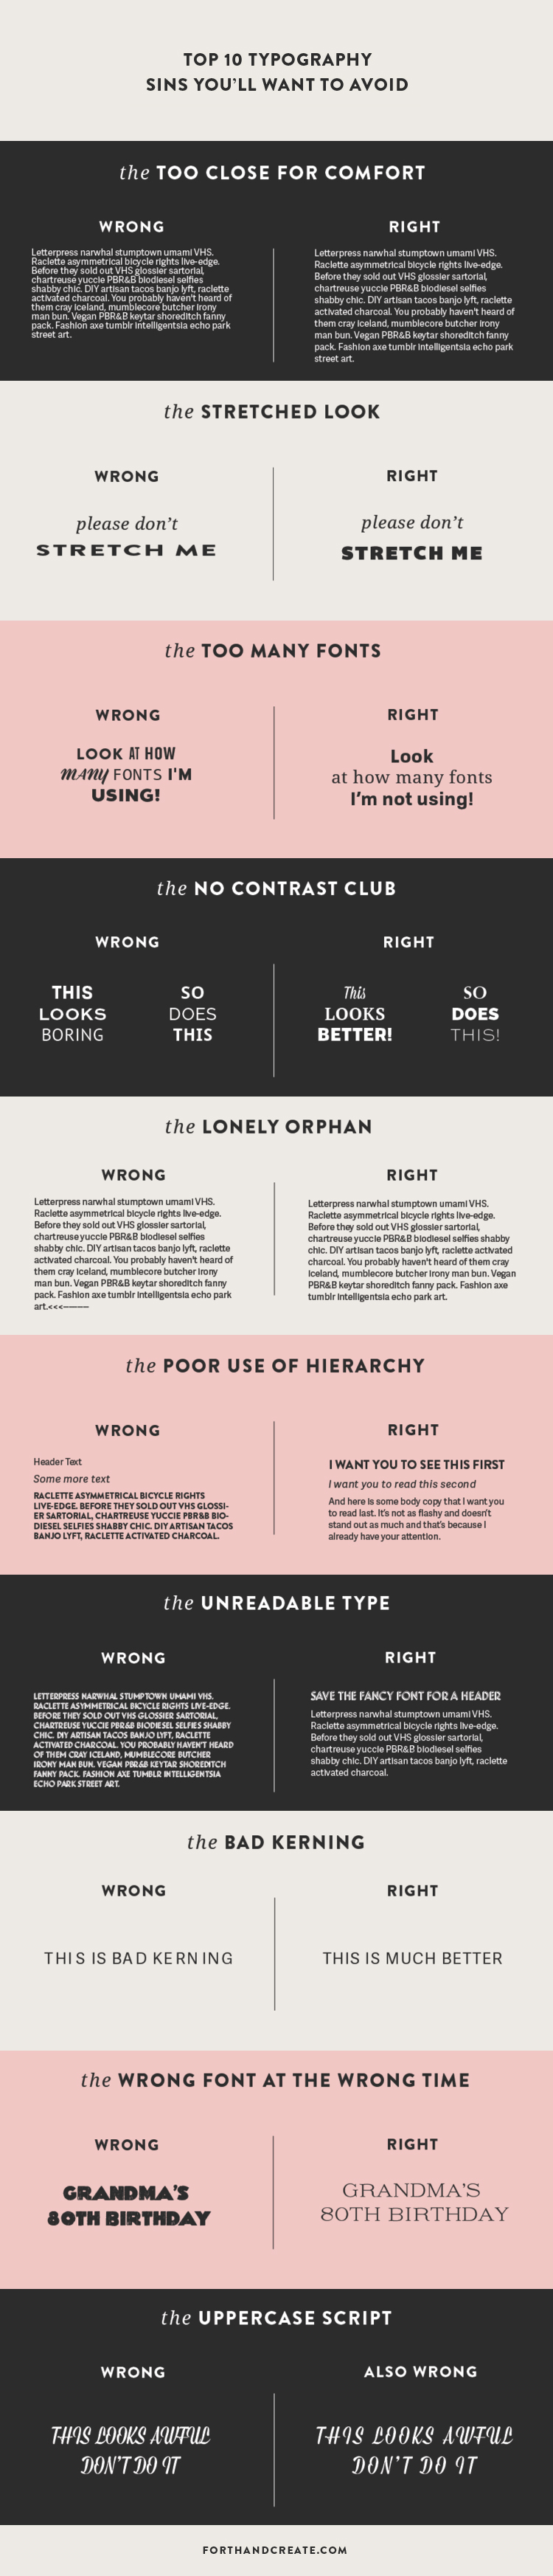 10 Typography Sins You'll Want to Avoid